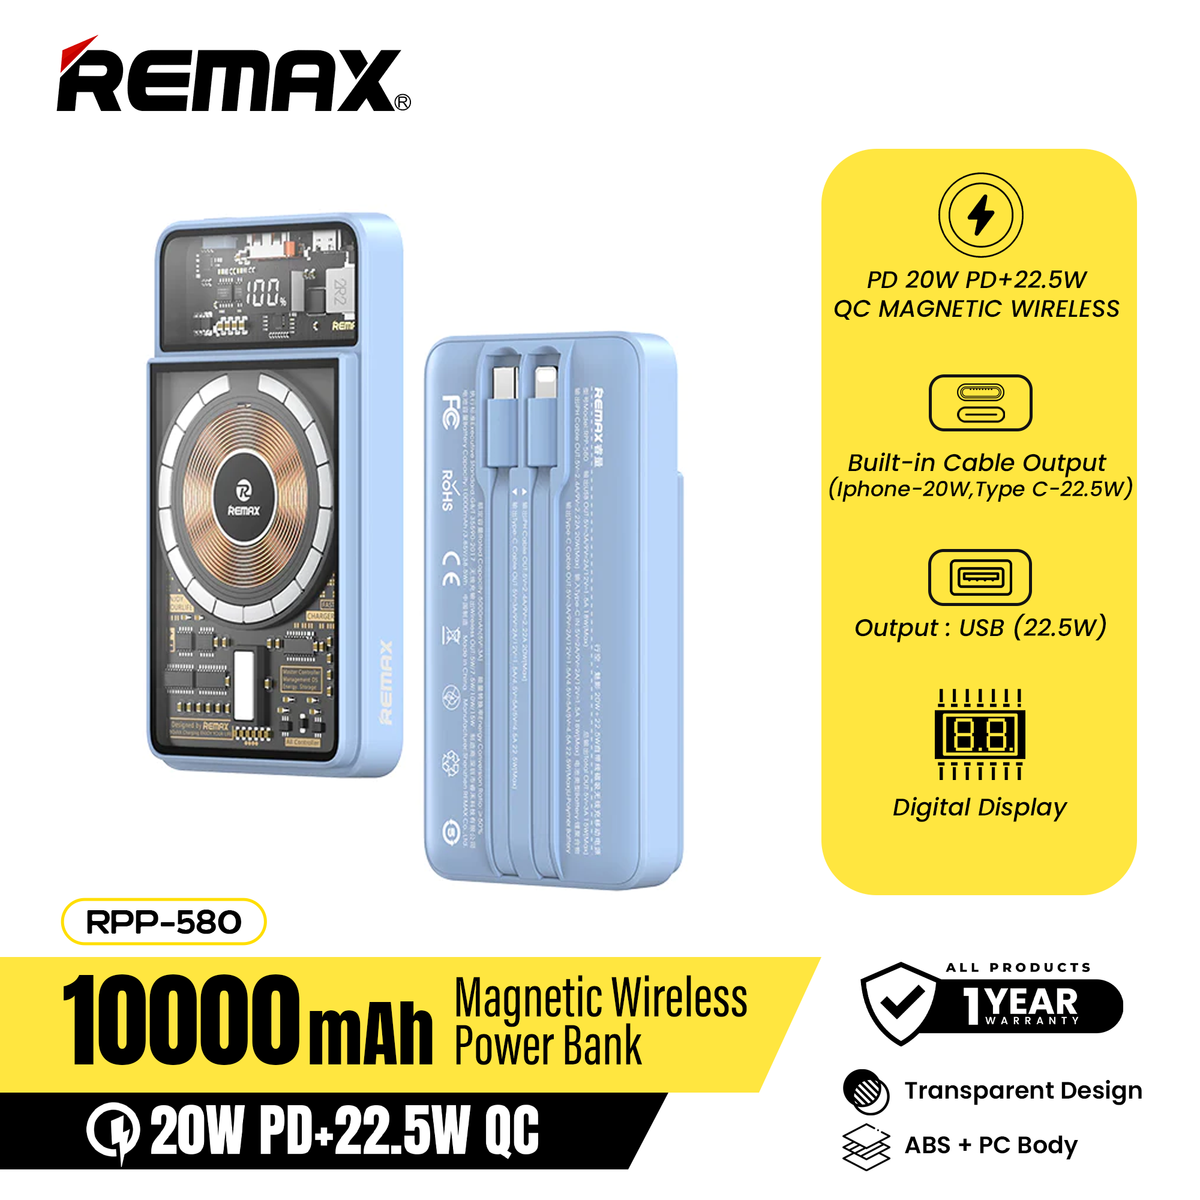 REMAX RPP-580 10000MAH WALKING PHANTOM 20W+22.5W CABLED MAGNETIC WIRELESS CHARGING POWER BANK-Blue